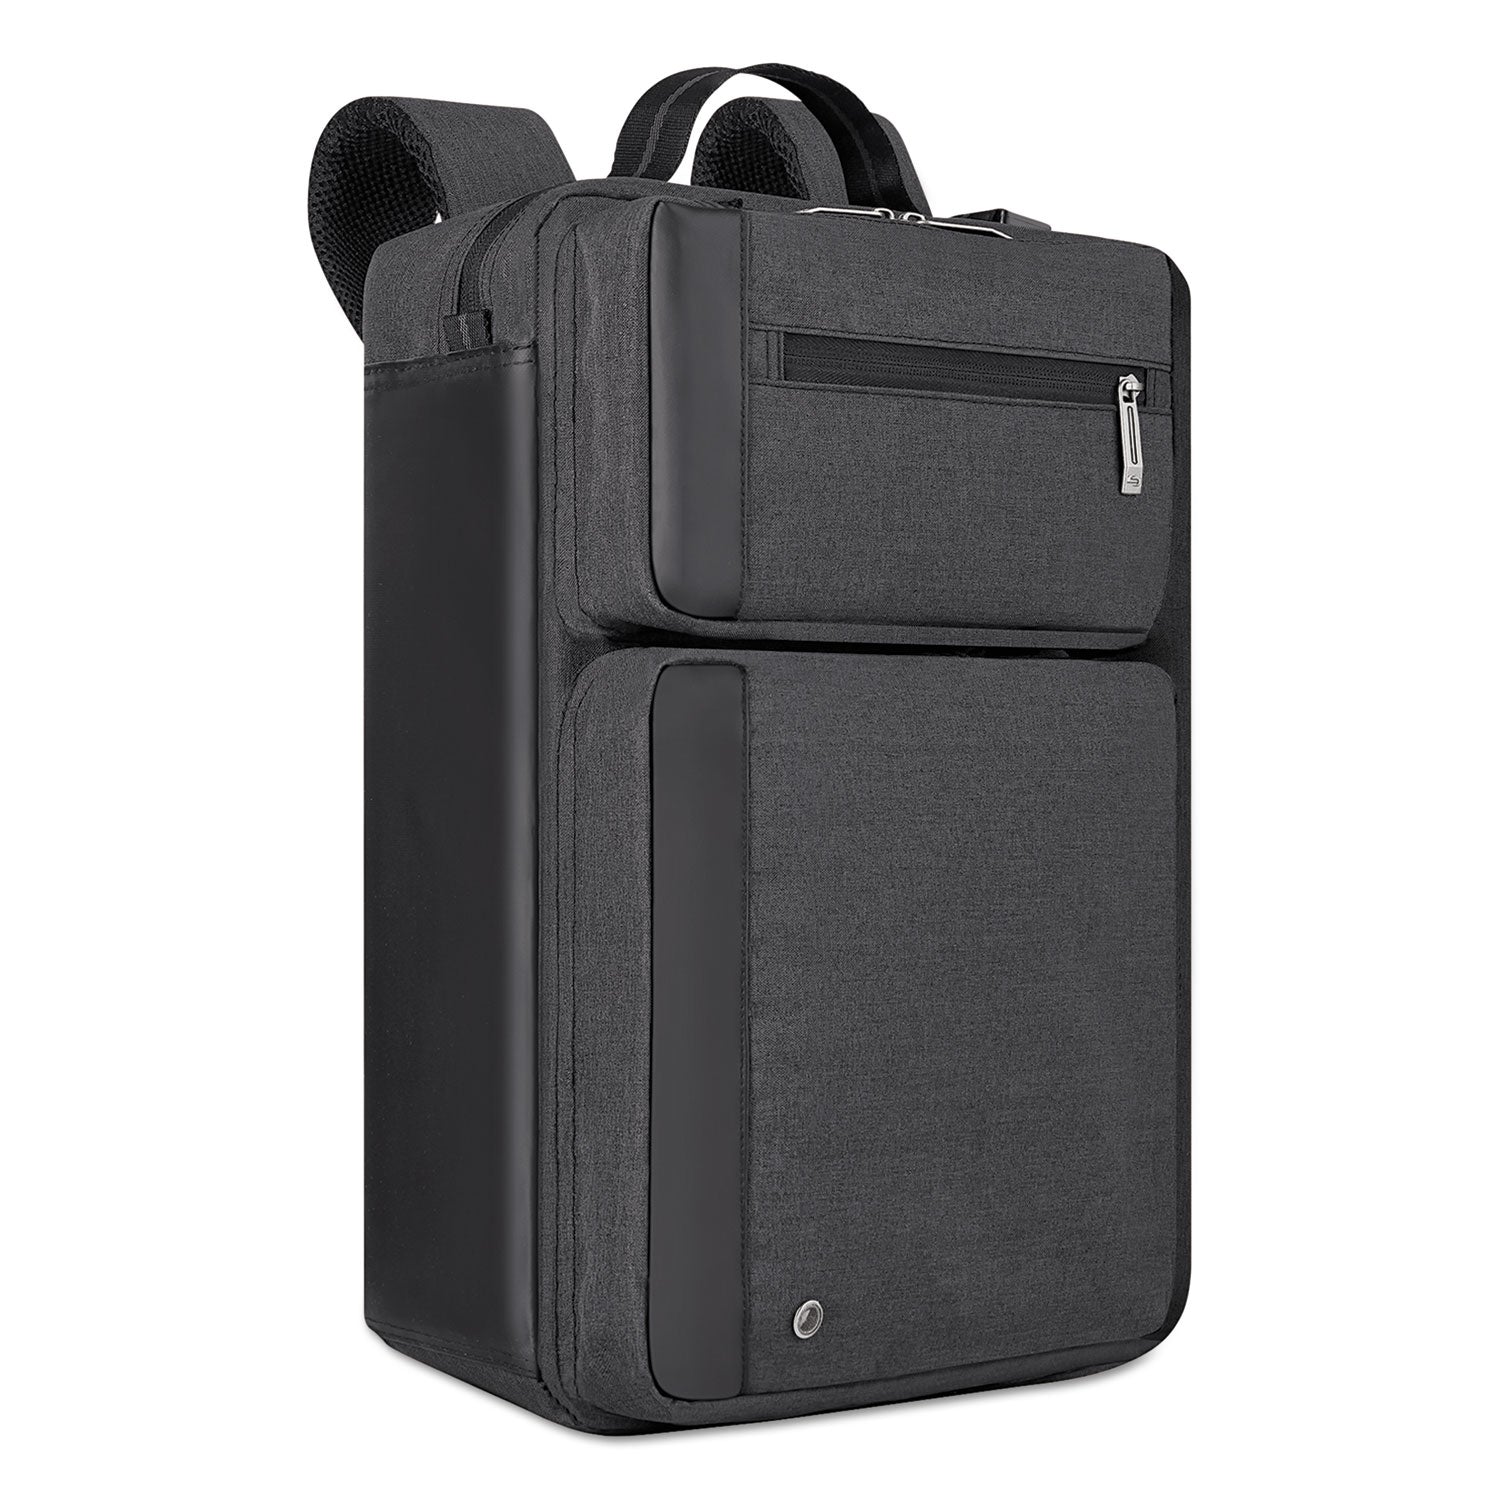 urban-hybrid-briefcase-fits-devices-up-to-156-polyester-1675-x-4-x-12-gray_uslubn31010 - 4